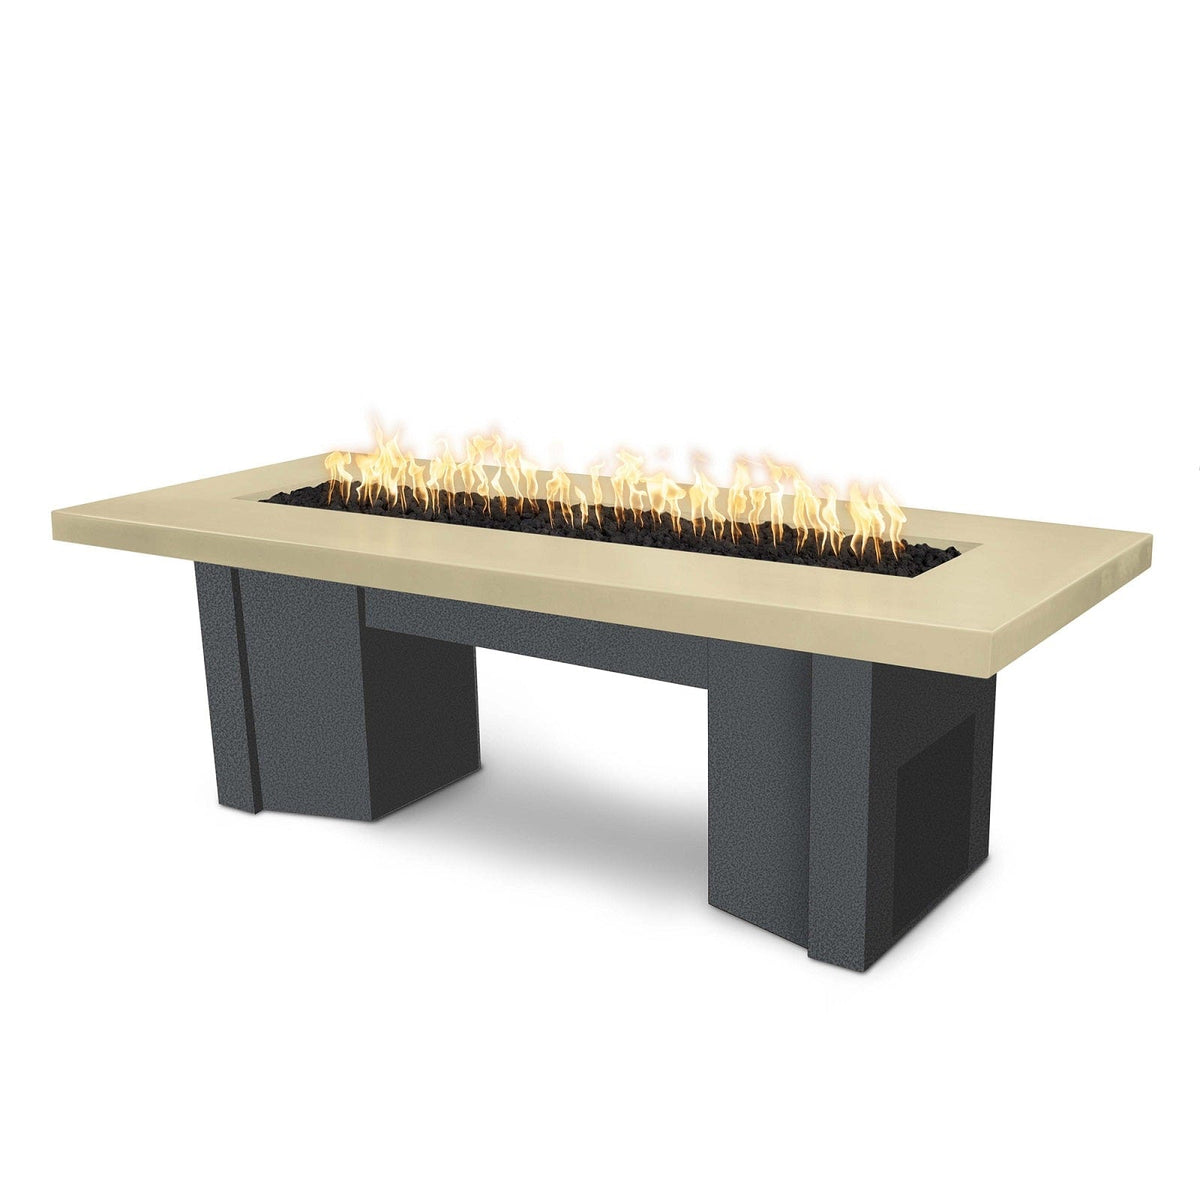 The Outdoor Plus Fire Features Vanilla (-VAN) / Silver Vein Powder Coated Steel (-SLV) The Outdoor Plus 60&quot; Alameda Fire Table Smooth Concrete in Liquid Propane - 110V Plug &amp; Play Electronic Ignition / OPT-ALMGFRC60EKIT-LP